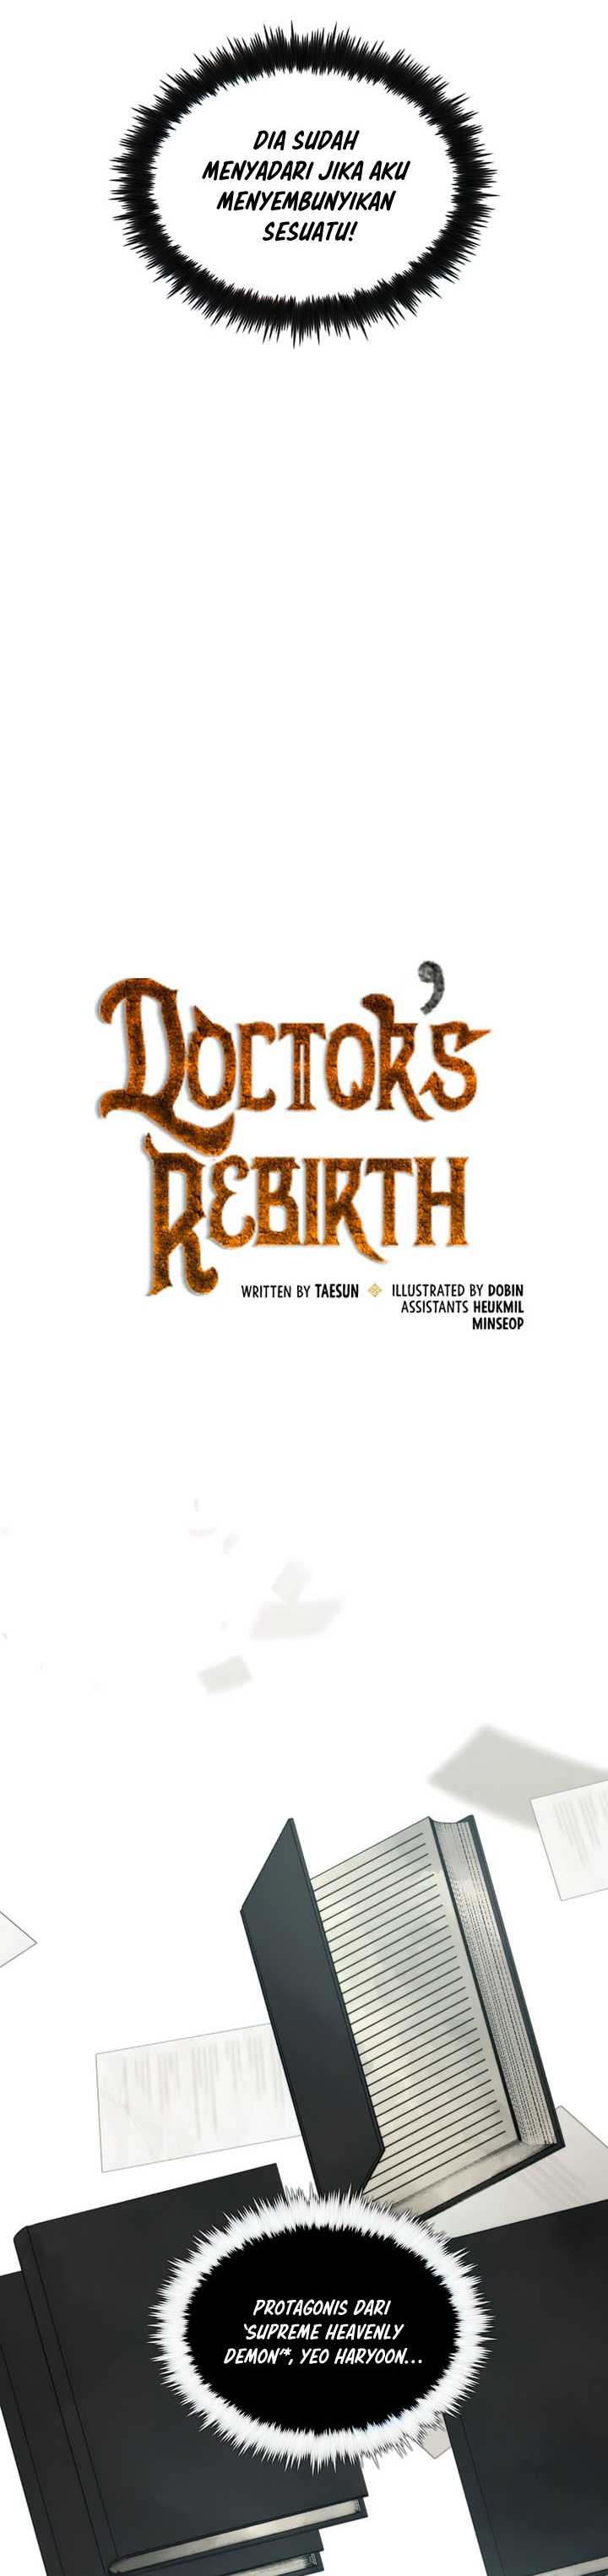 Doctor’s Rebirth Chapter 99